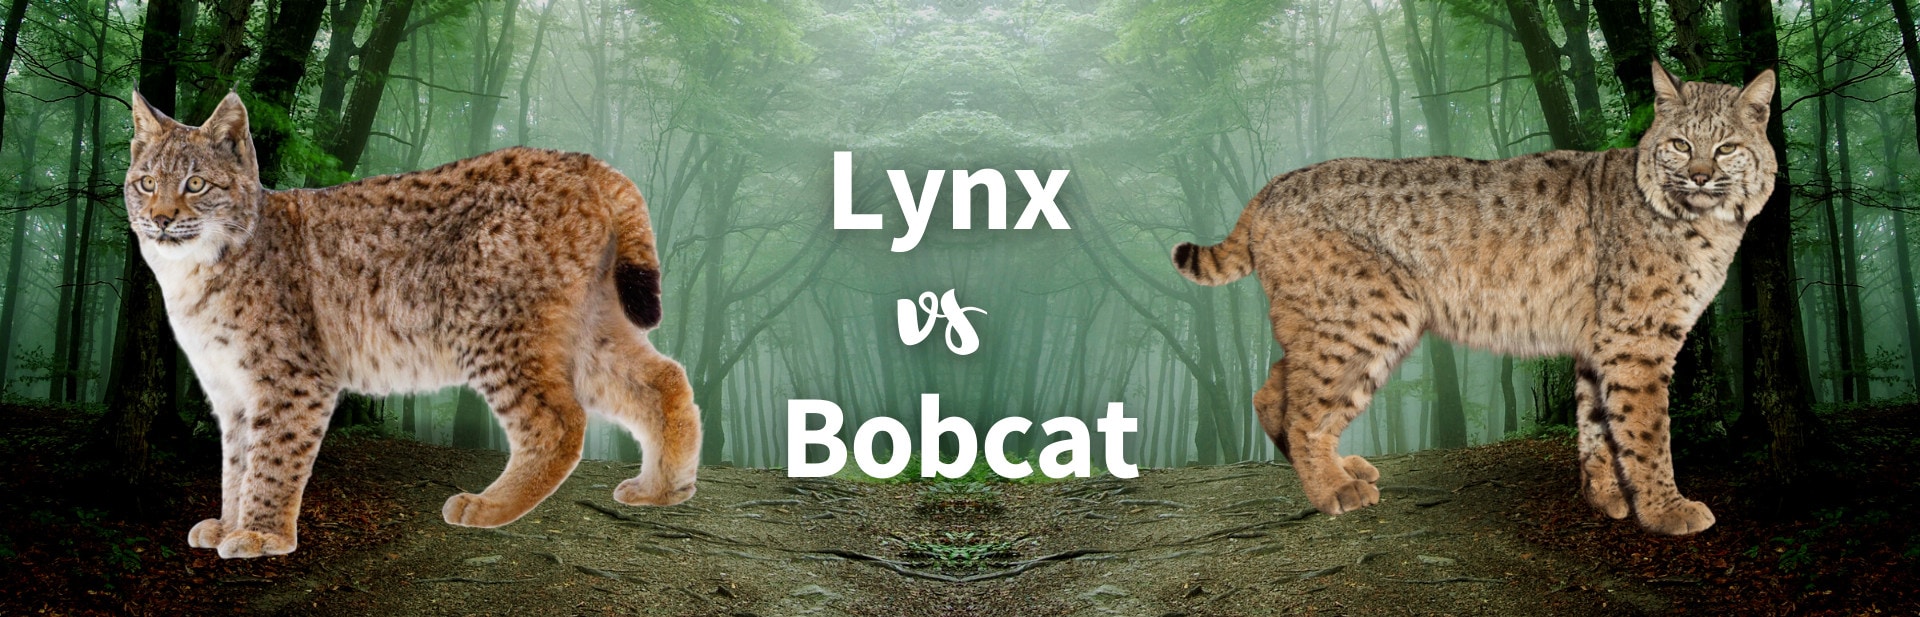 Lynx vs Bobcat: All Differences Between The Two Wild Cats